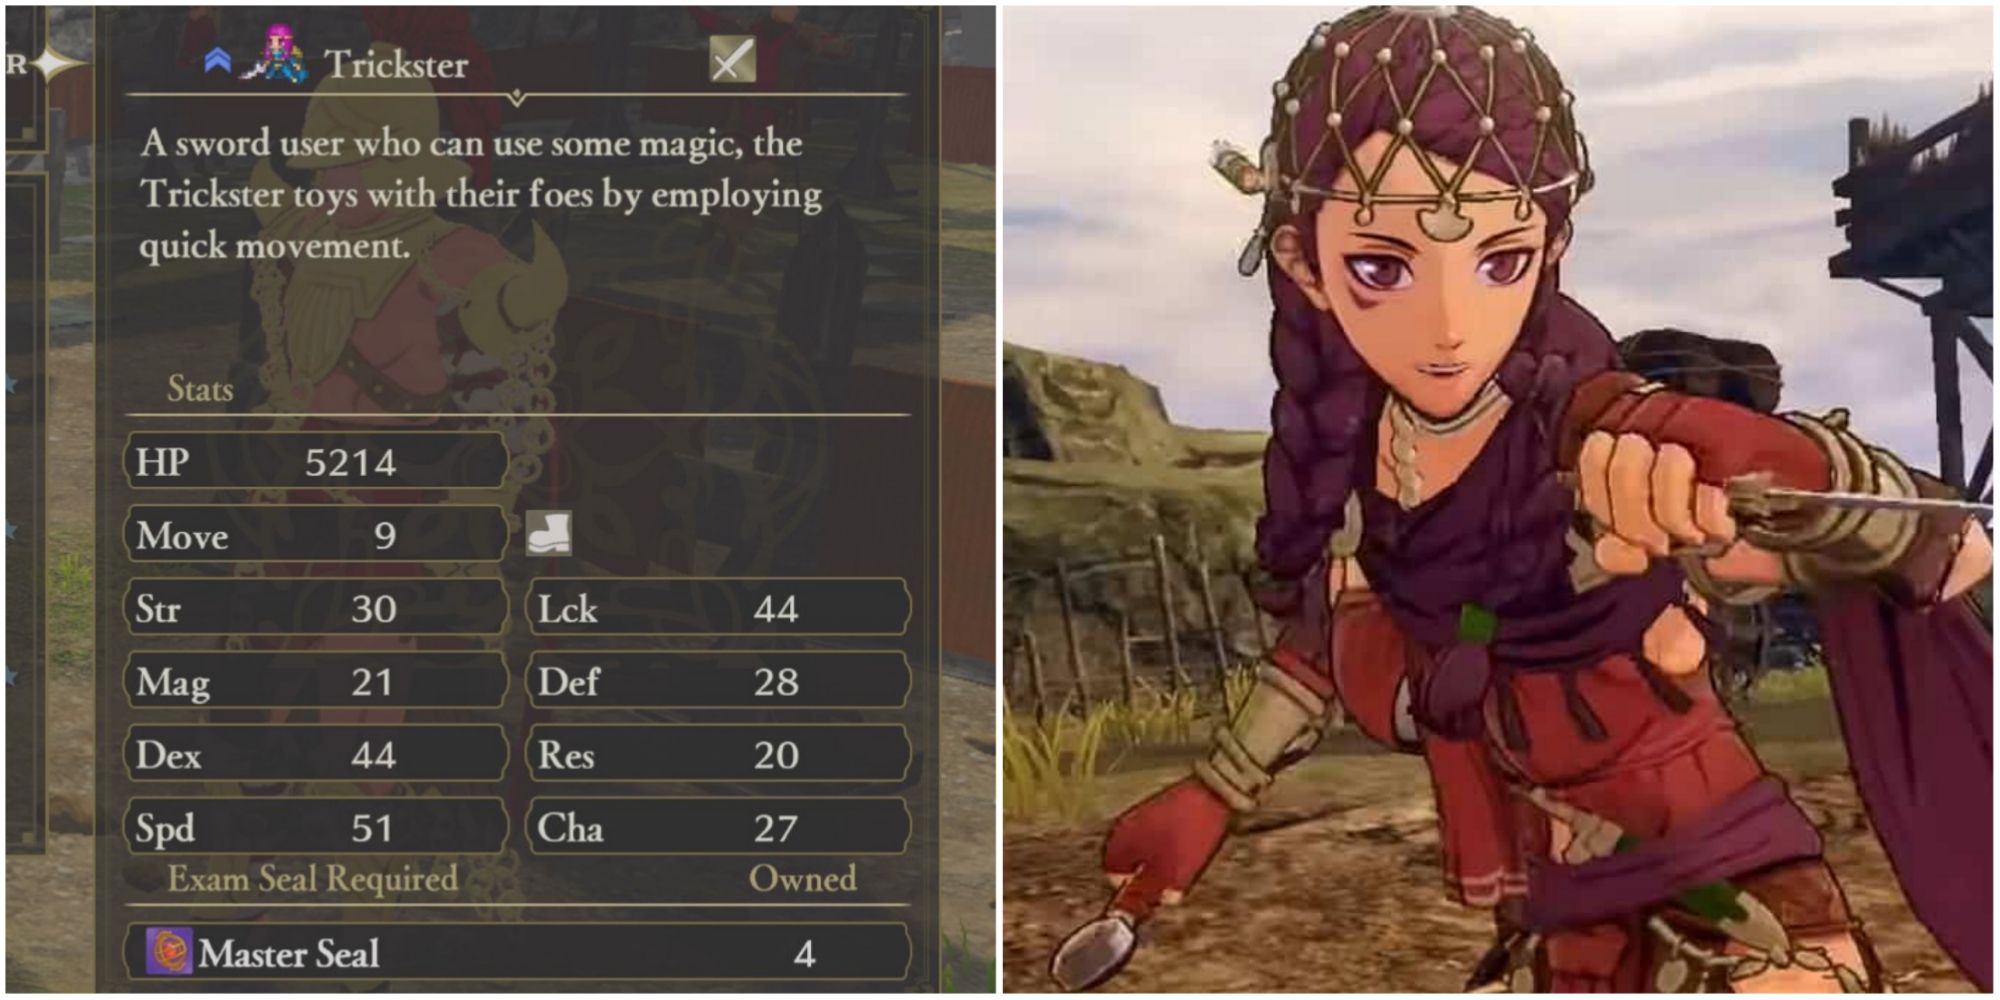 Split image of Trickster stats menu and Petra wielding two swords